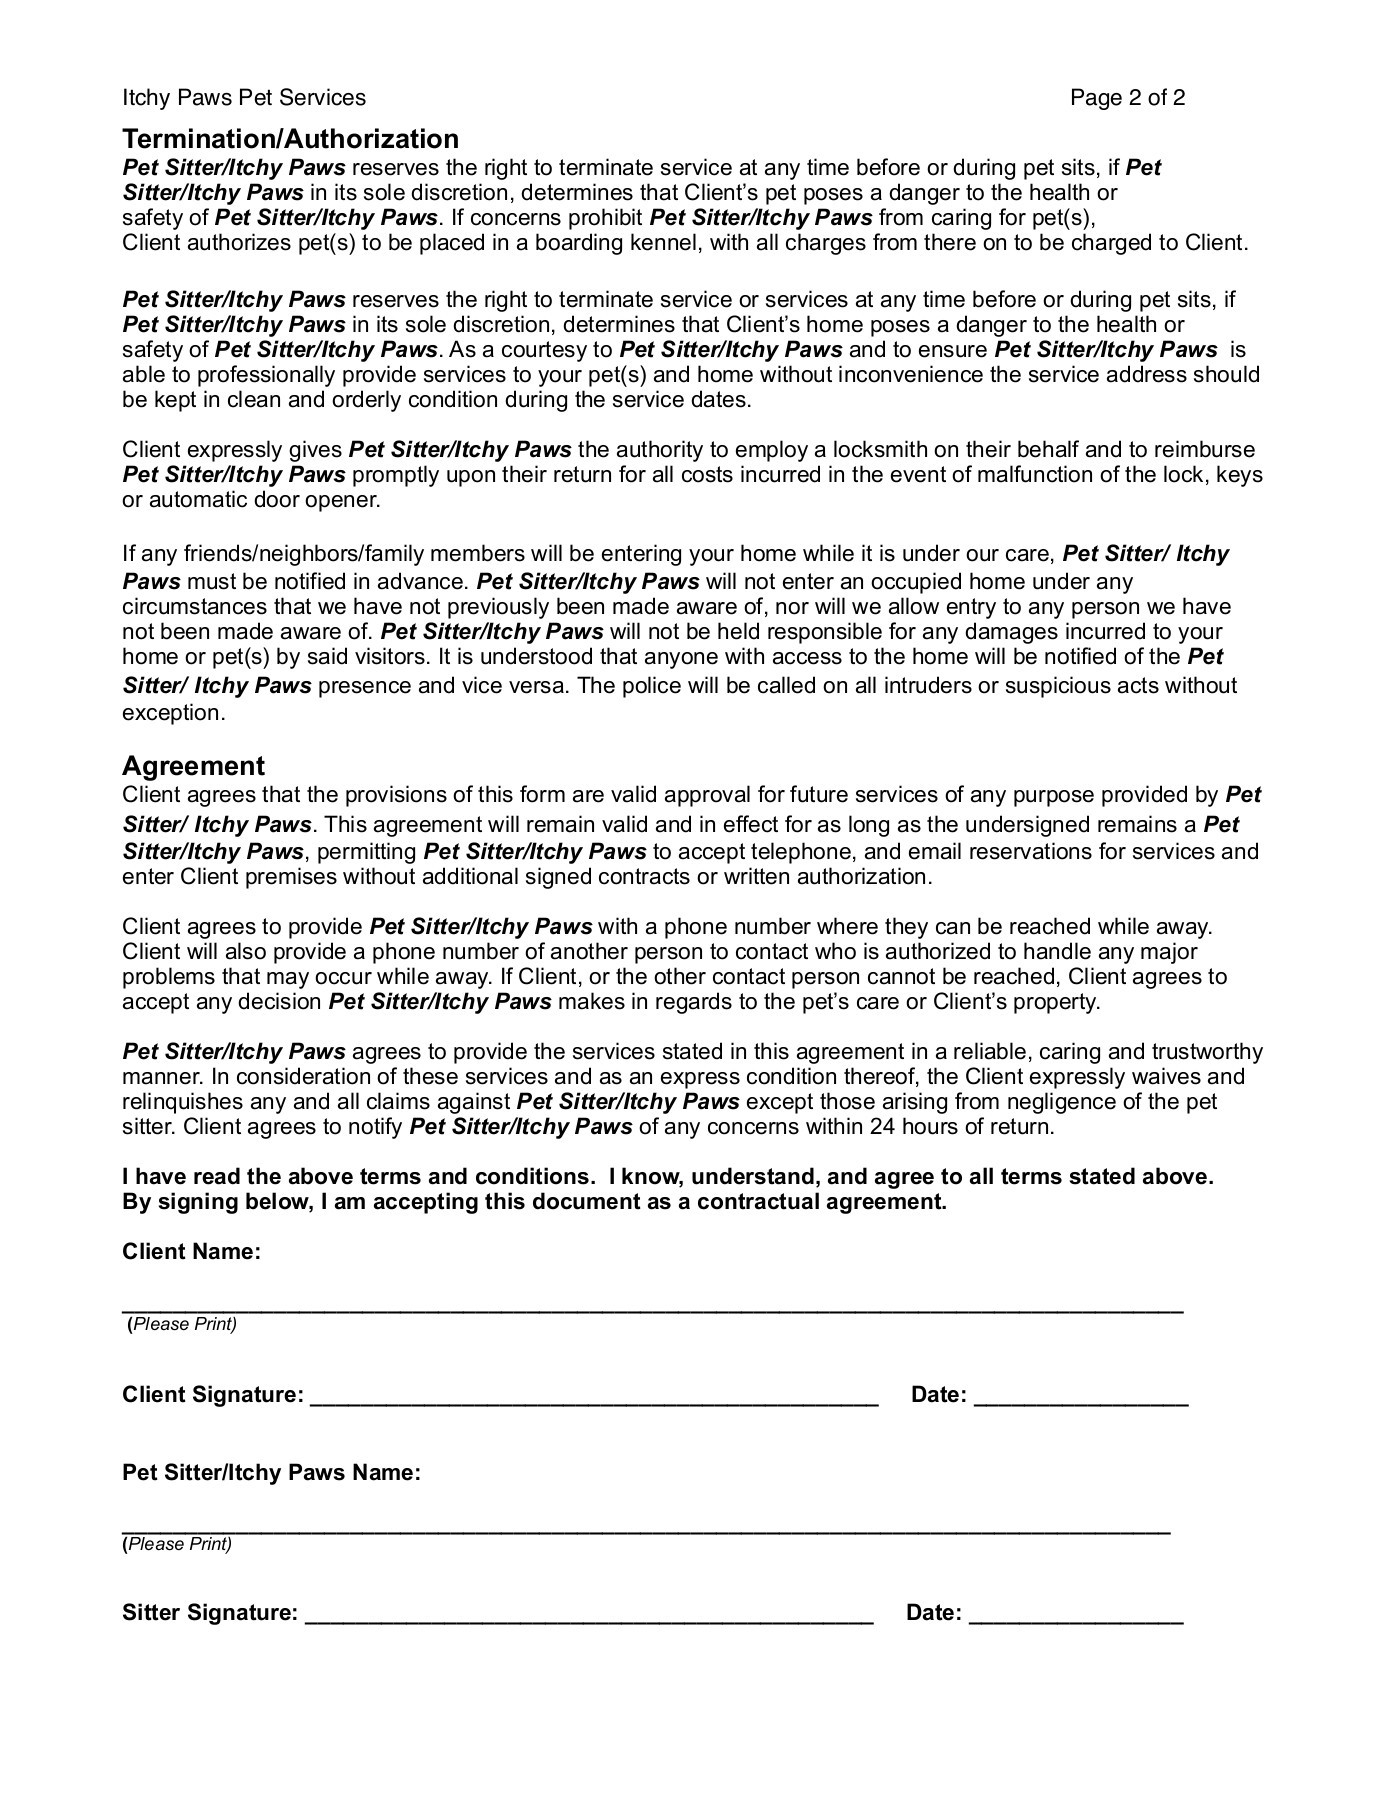 Service Agreement Terms And Conditions Page 1 Of 2 Pet Sittingservice Agreement Fliphtml5